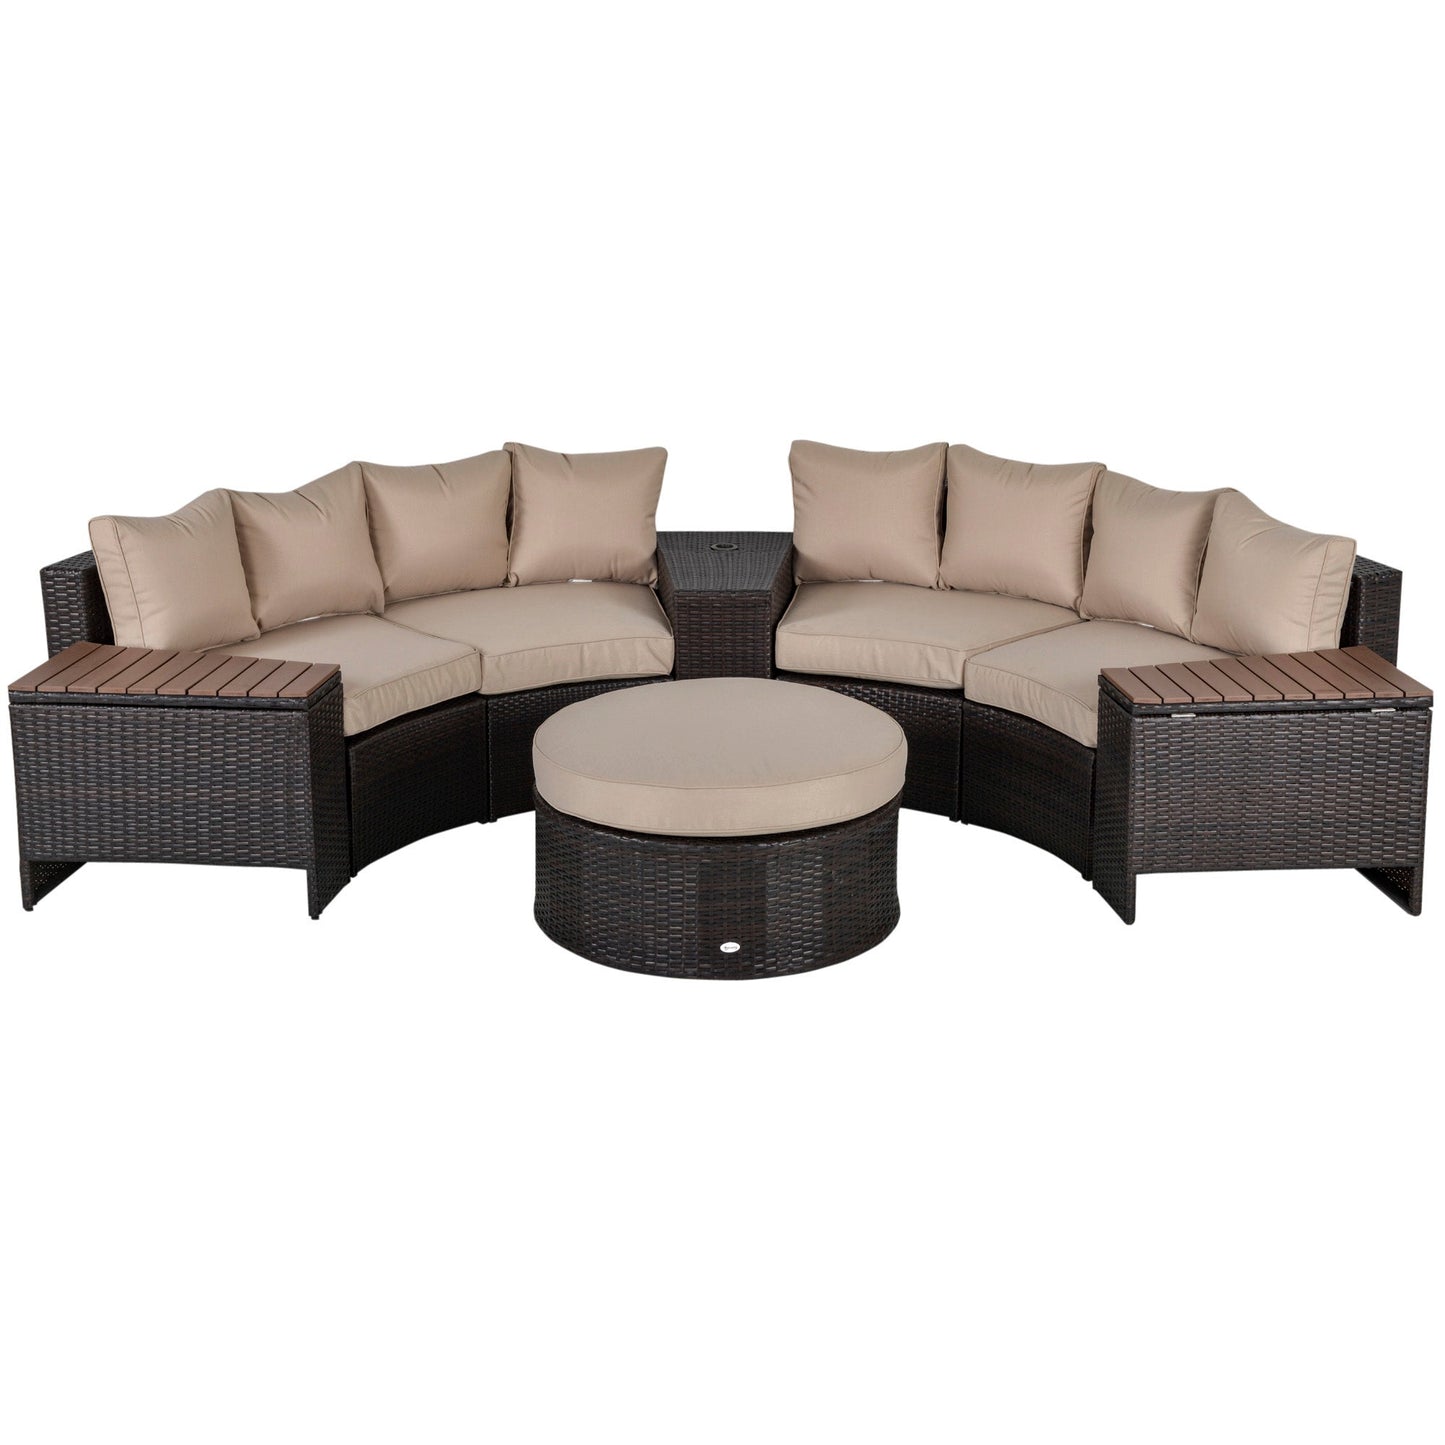 Outdoor and Garden-8 Piece Outdoor Rattan Sofa, Half Round Patio Furniture Set with Side Tables, Umbrella Hole, and Cushions, Beige - Outdoor Style Company